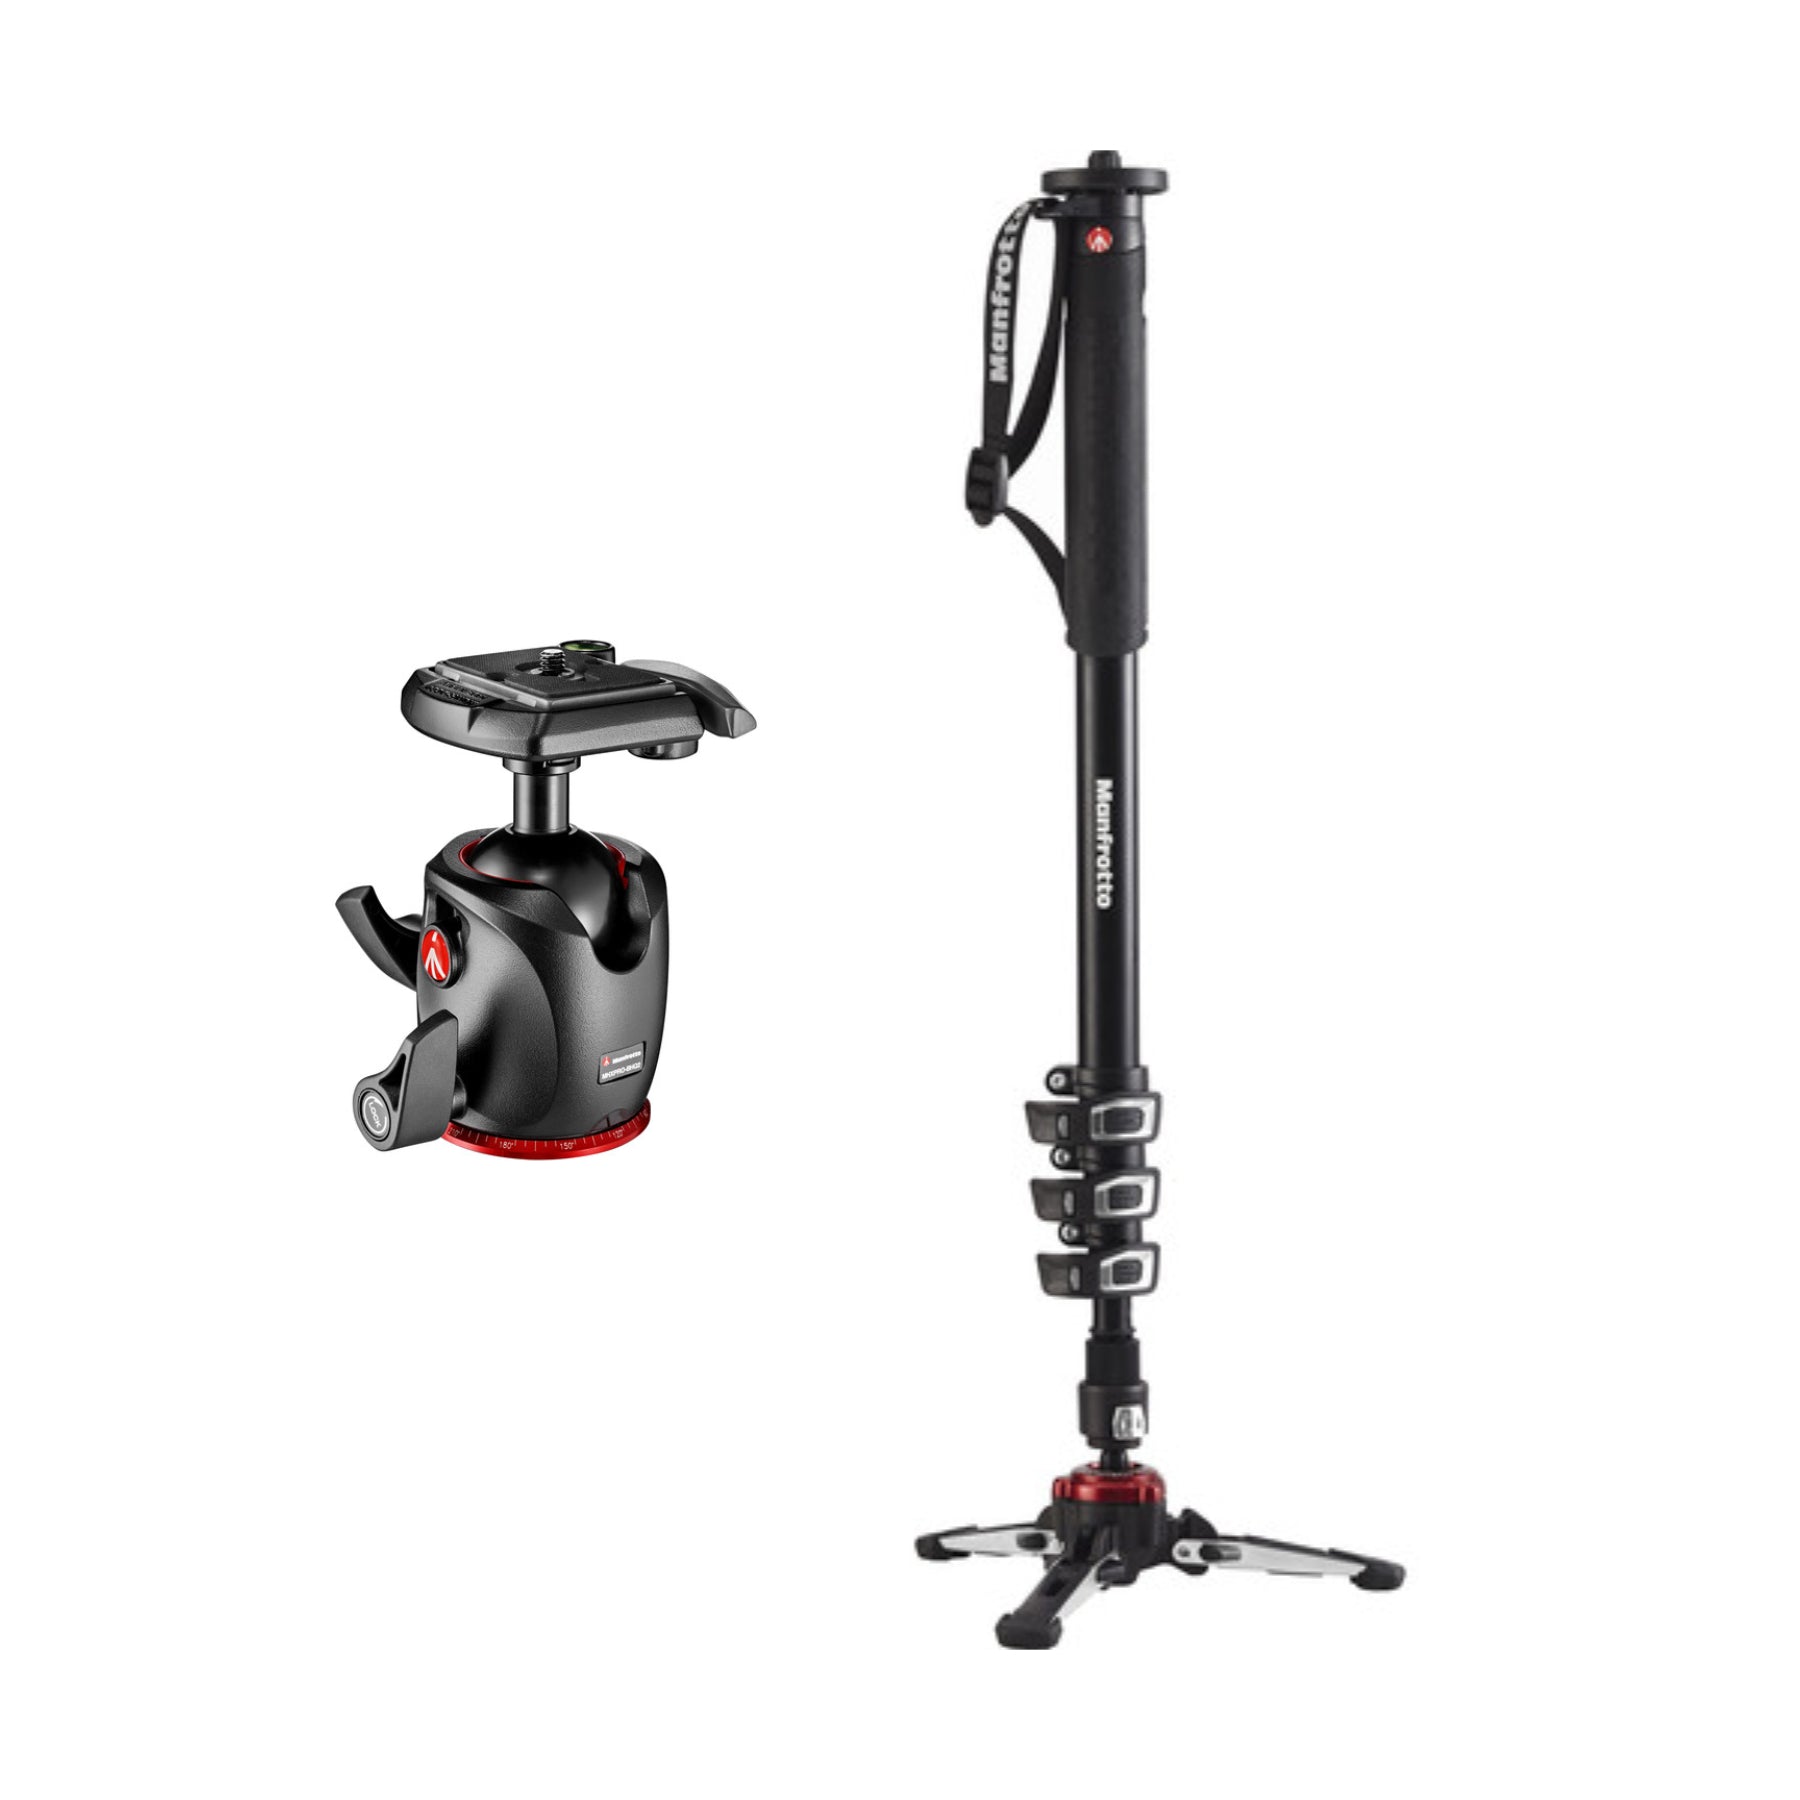 Manfrotto monopod with ball head for hire